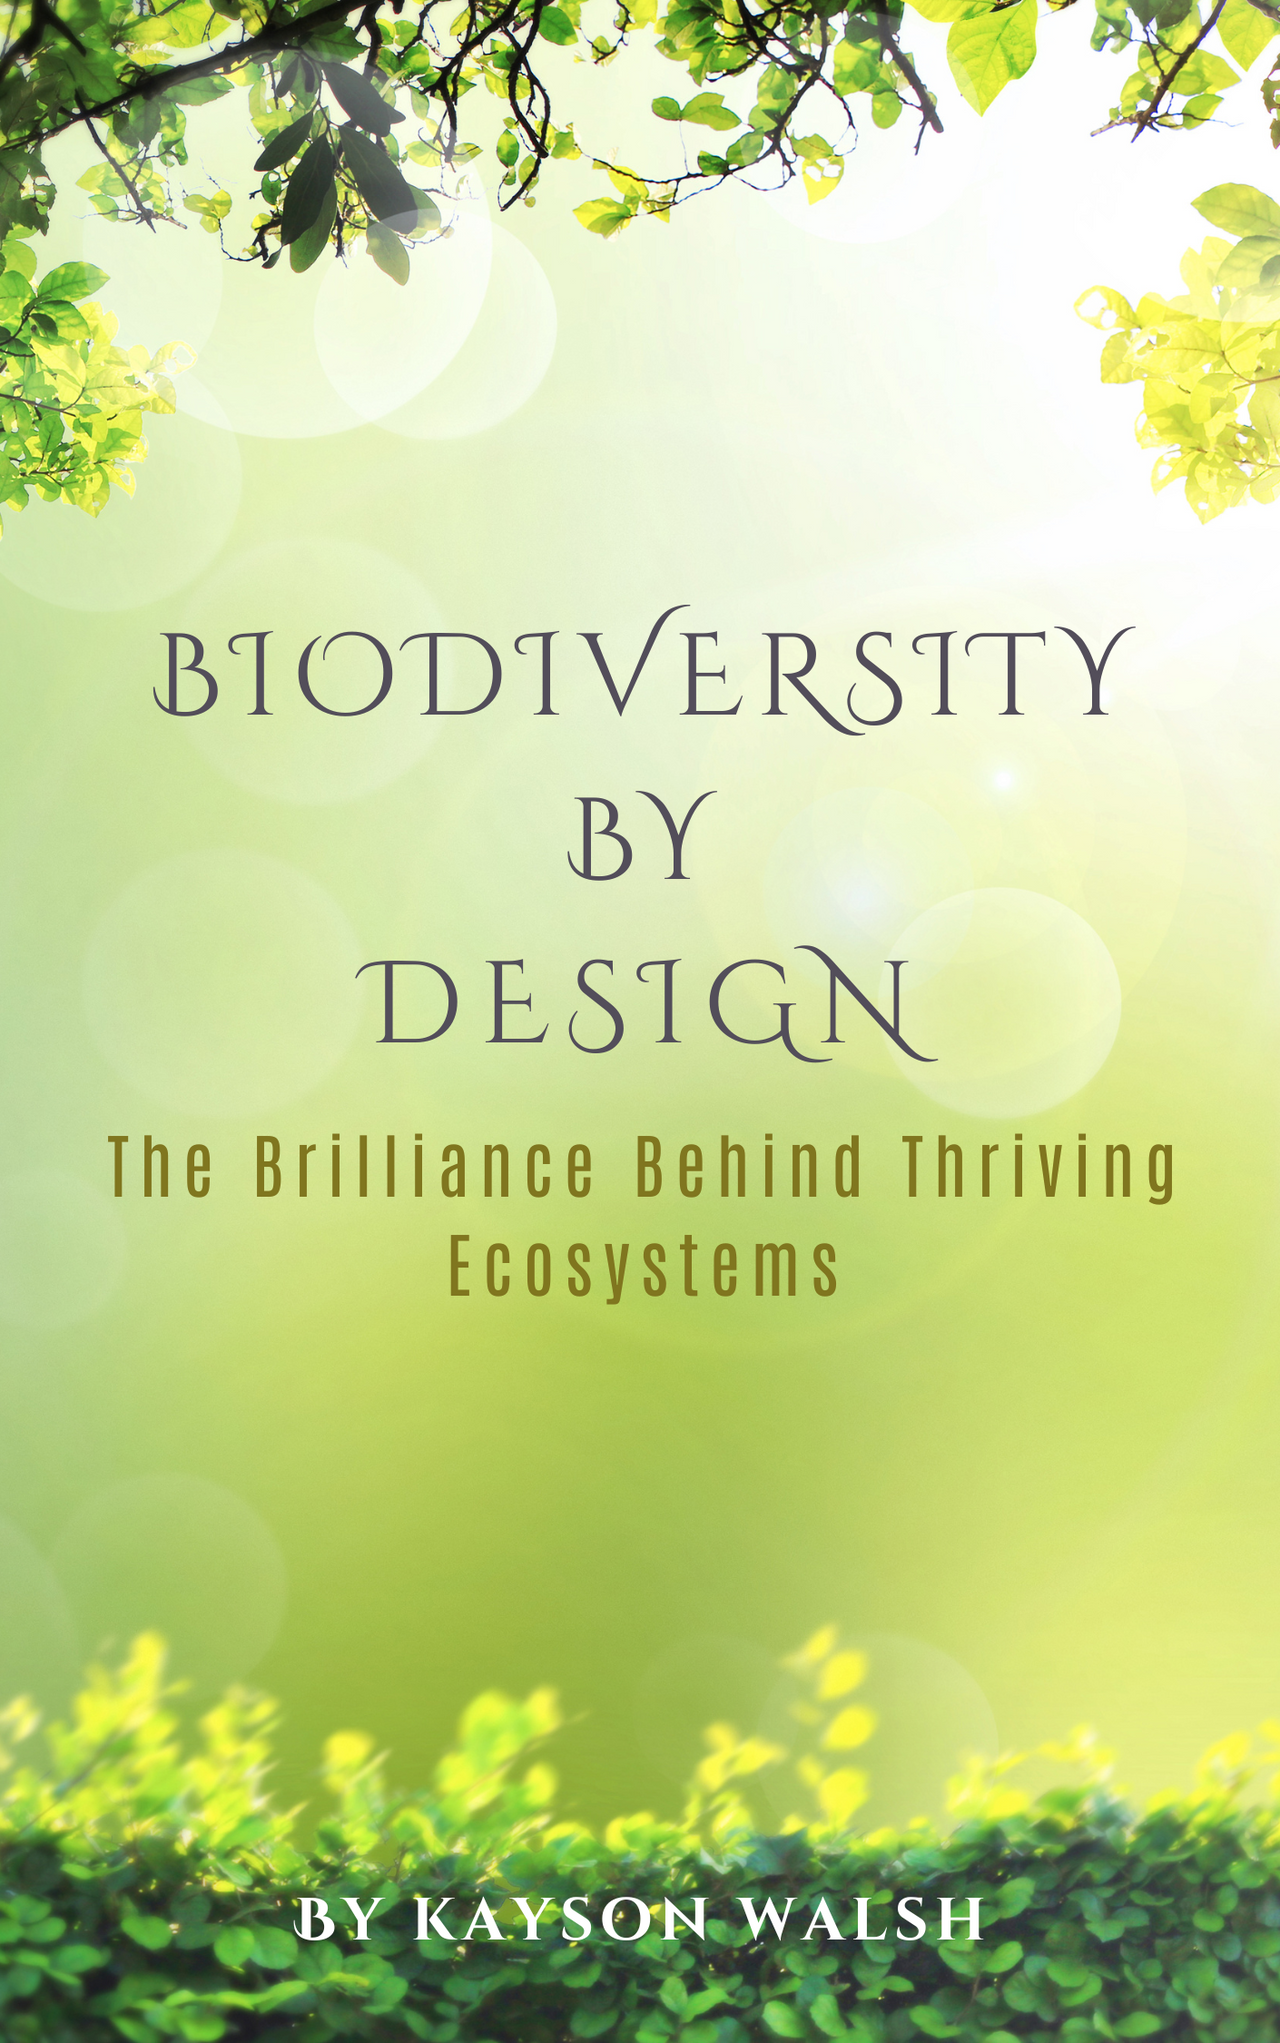 Biodiversity by Design: The Brilliance Behind Thriving Ecosystems